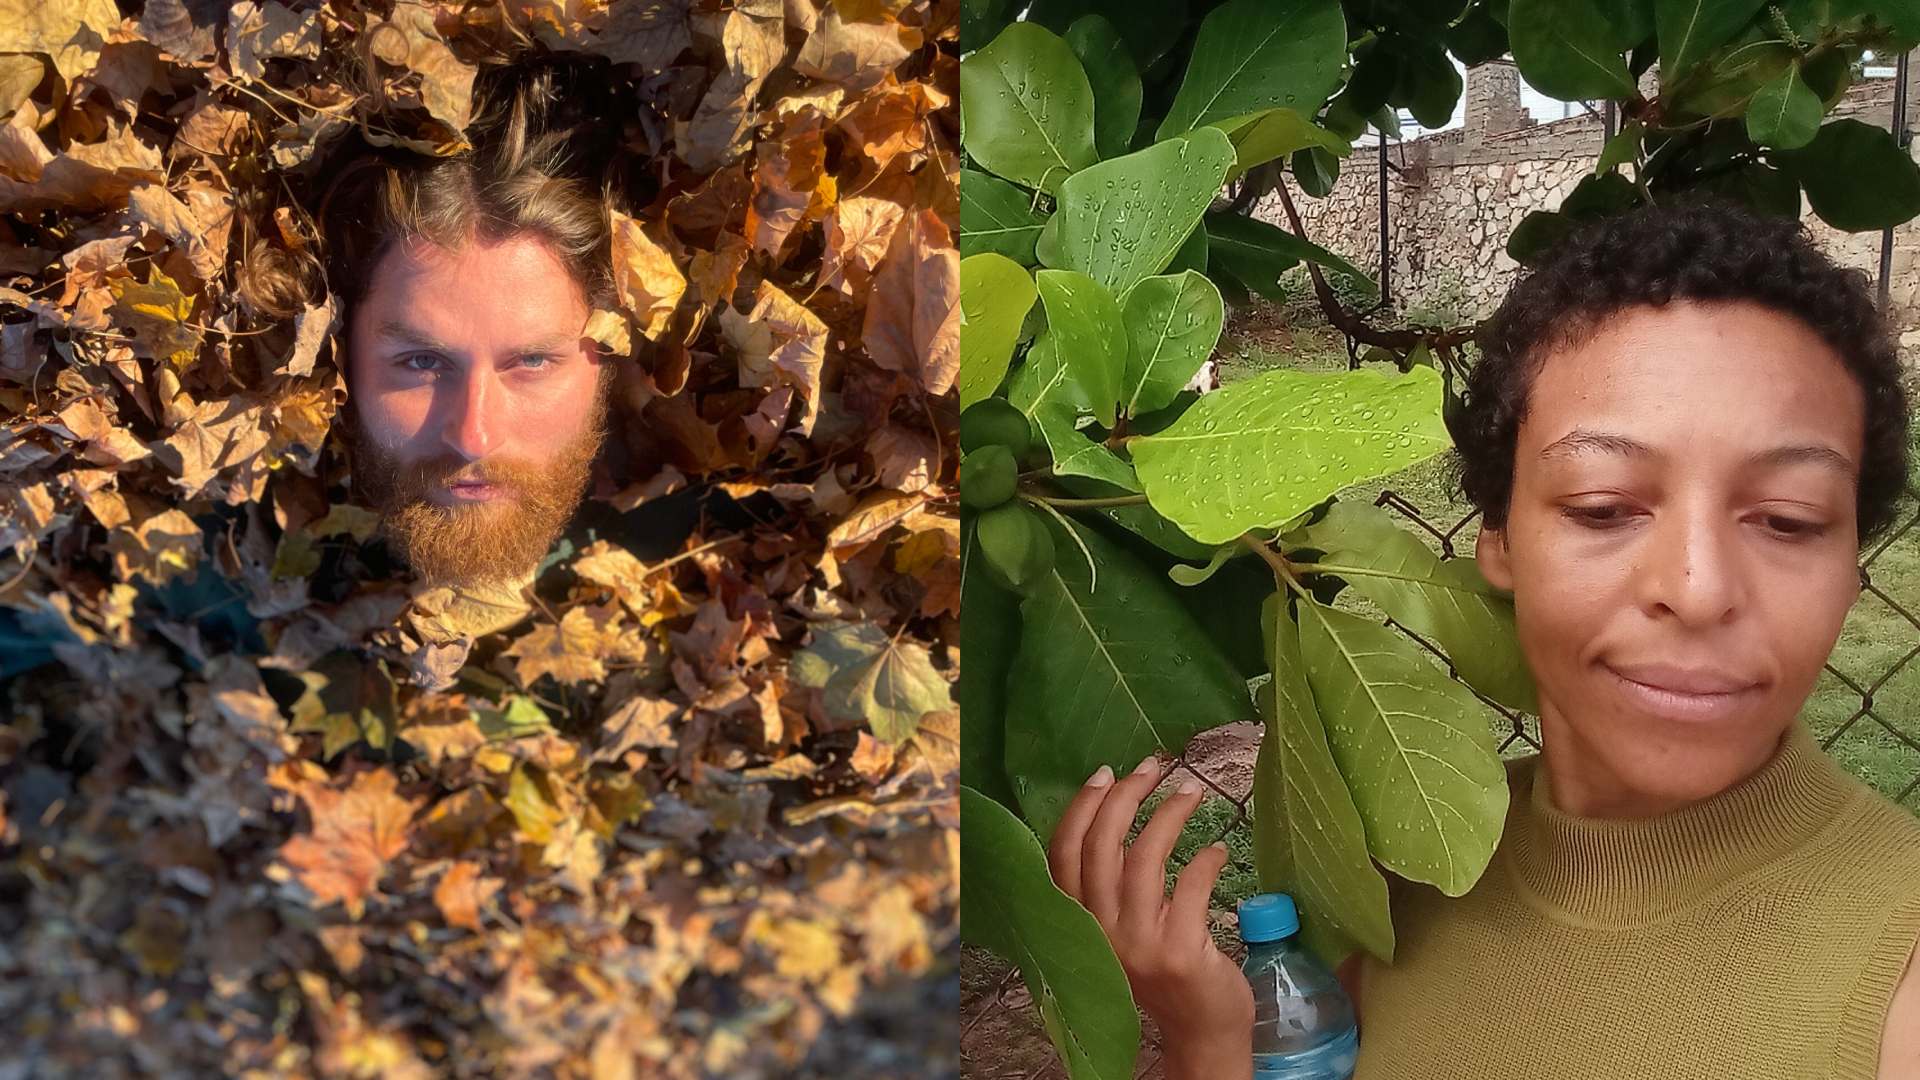 Two artist portraits, Ben Binversie on the left, Ben is in a pile of leaves with only his head showing, on the right Martina Patterson next to big green leaves.